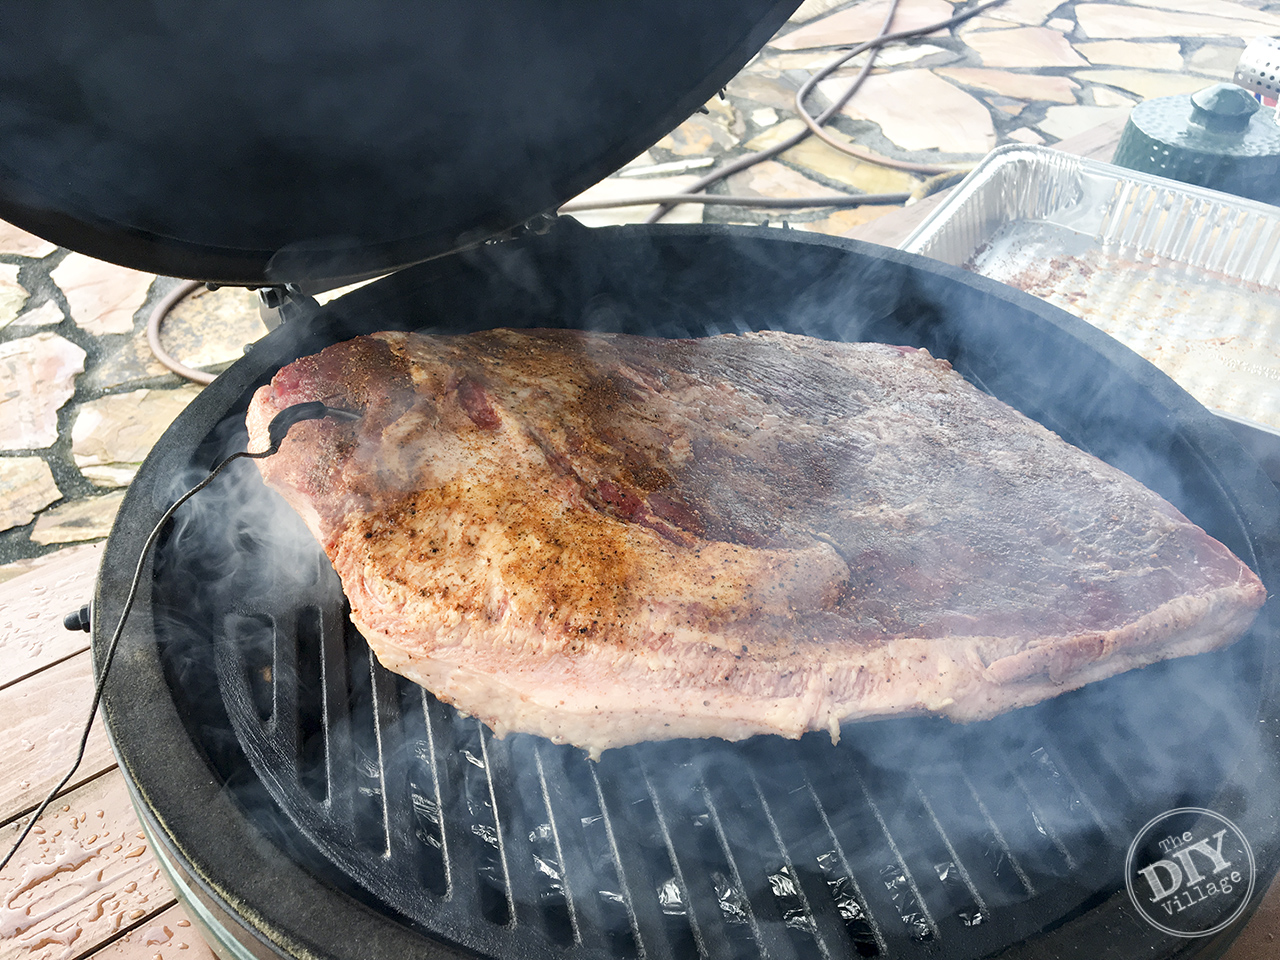 Big Green Egg Smoked brisket, perfect for summer cookouts. #cookout #biggreenegg #brisket #summer